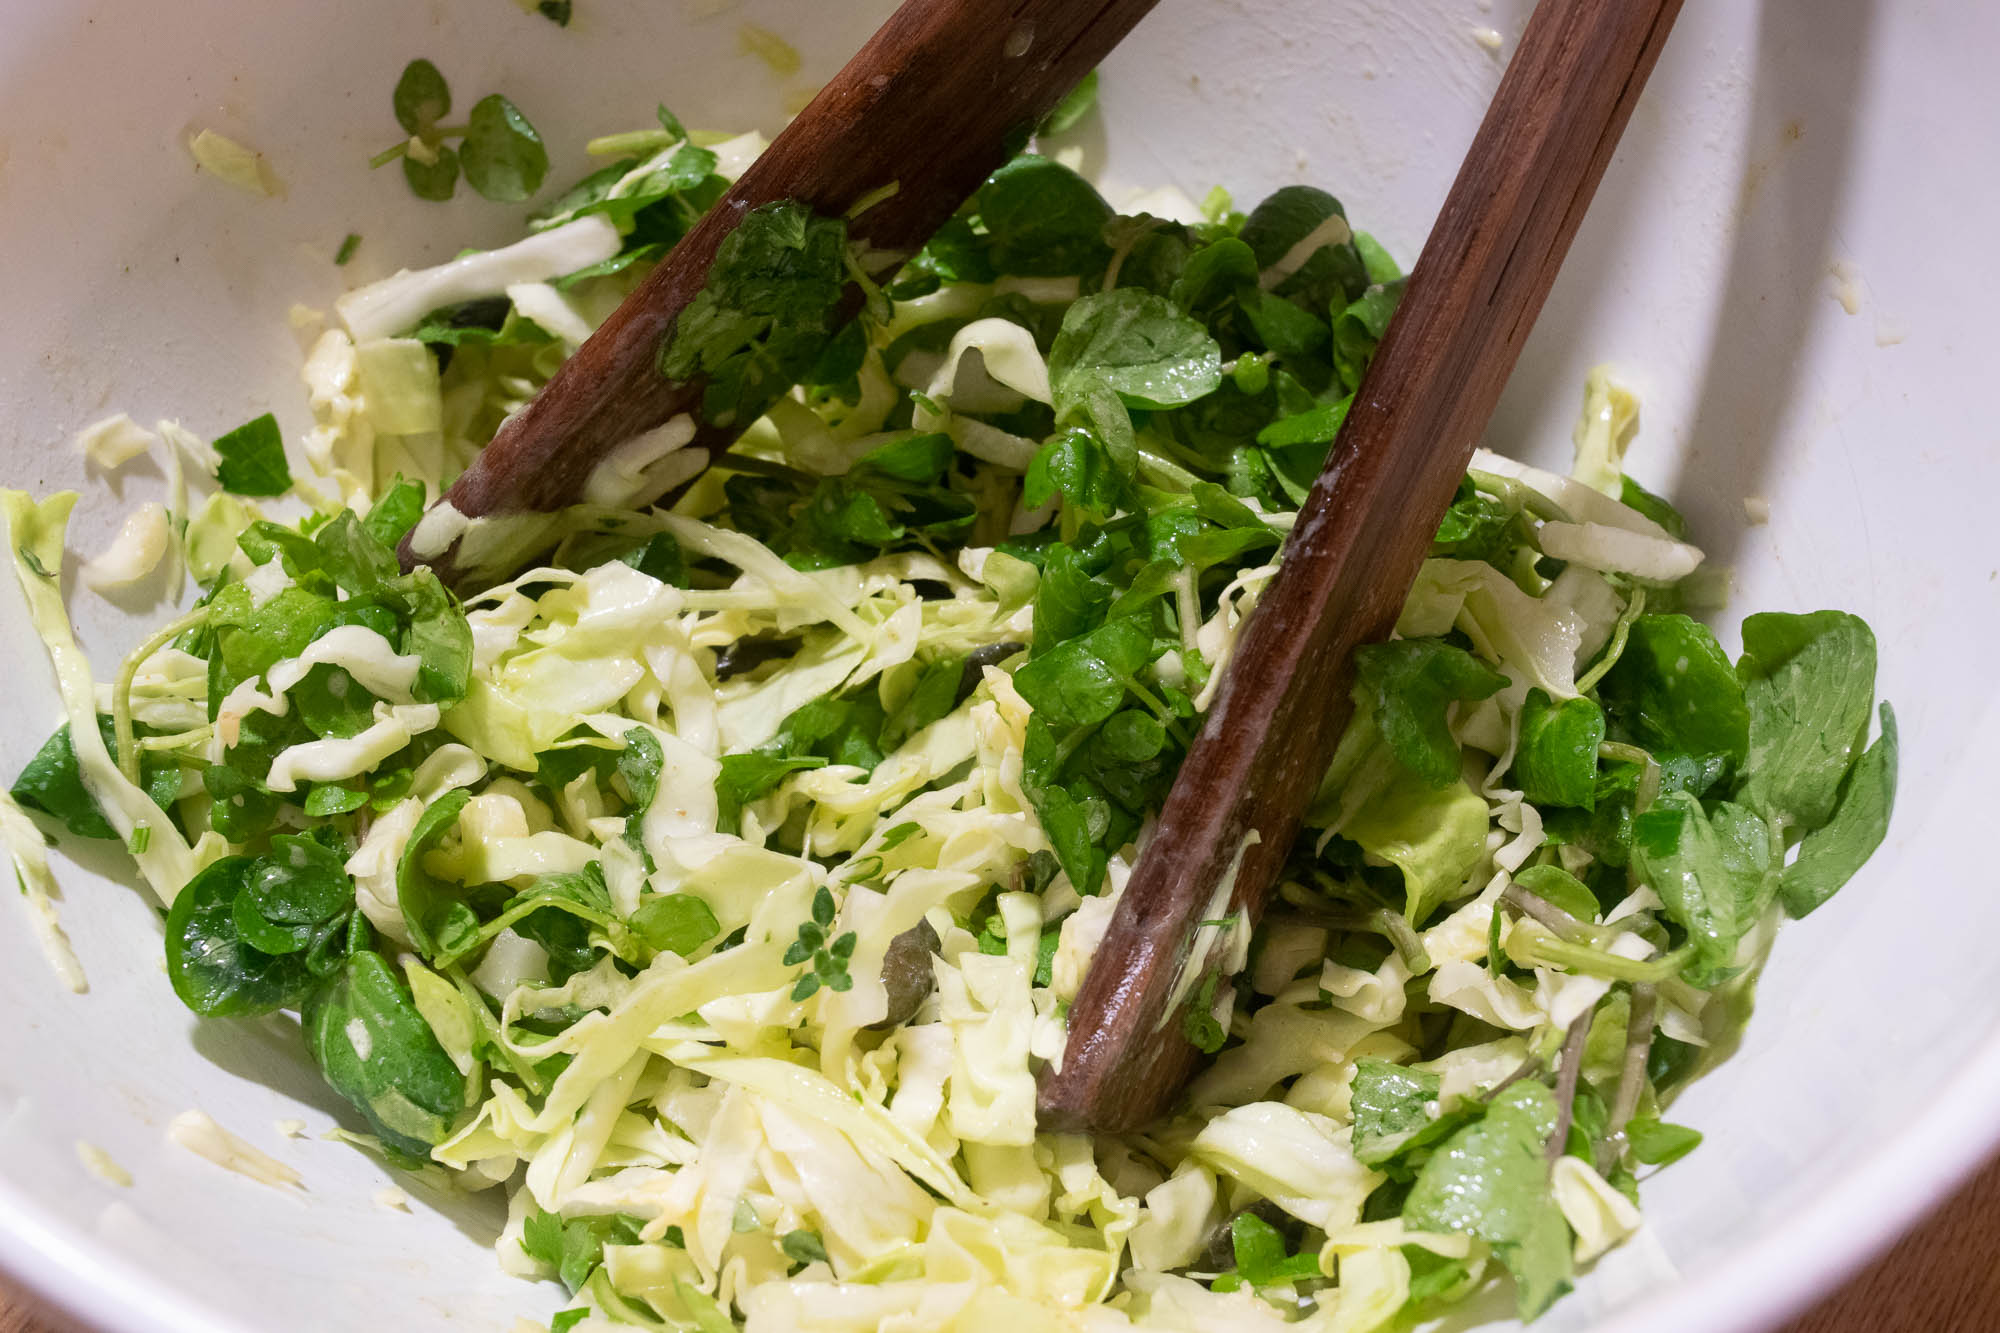 alt="cabbage and watercress salad."